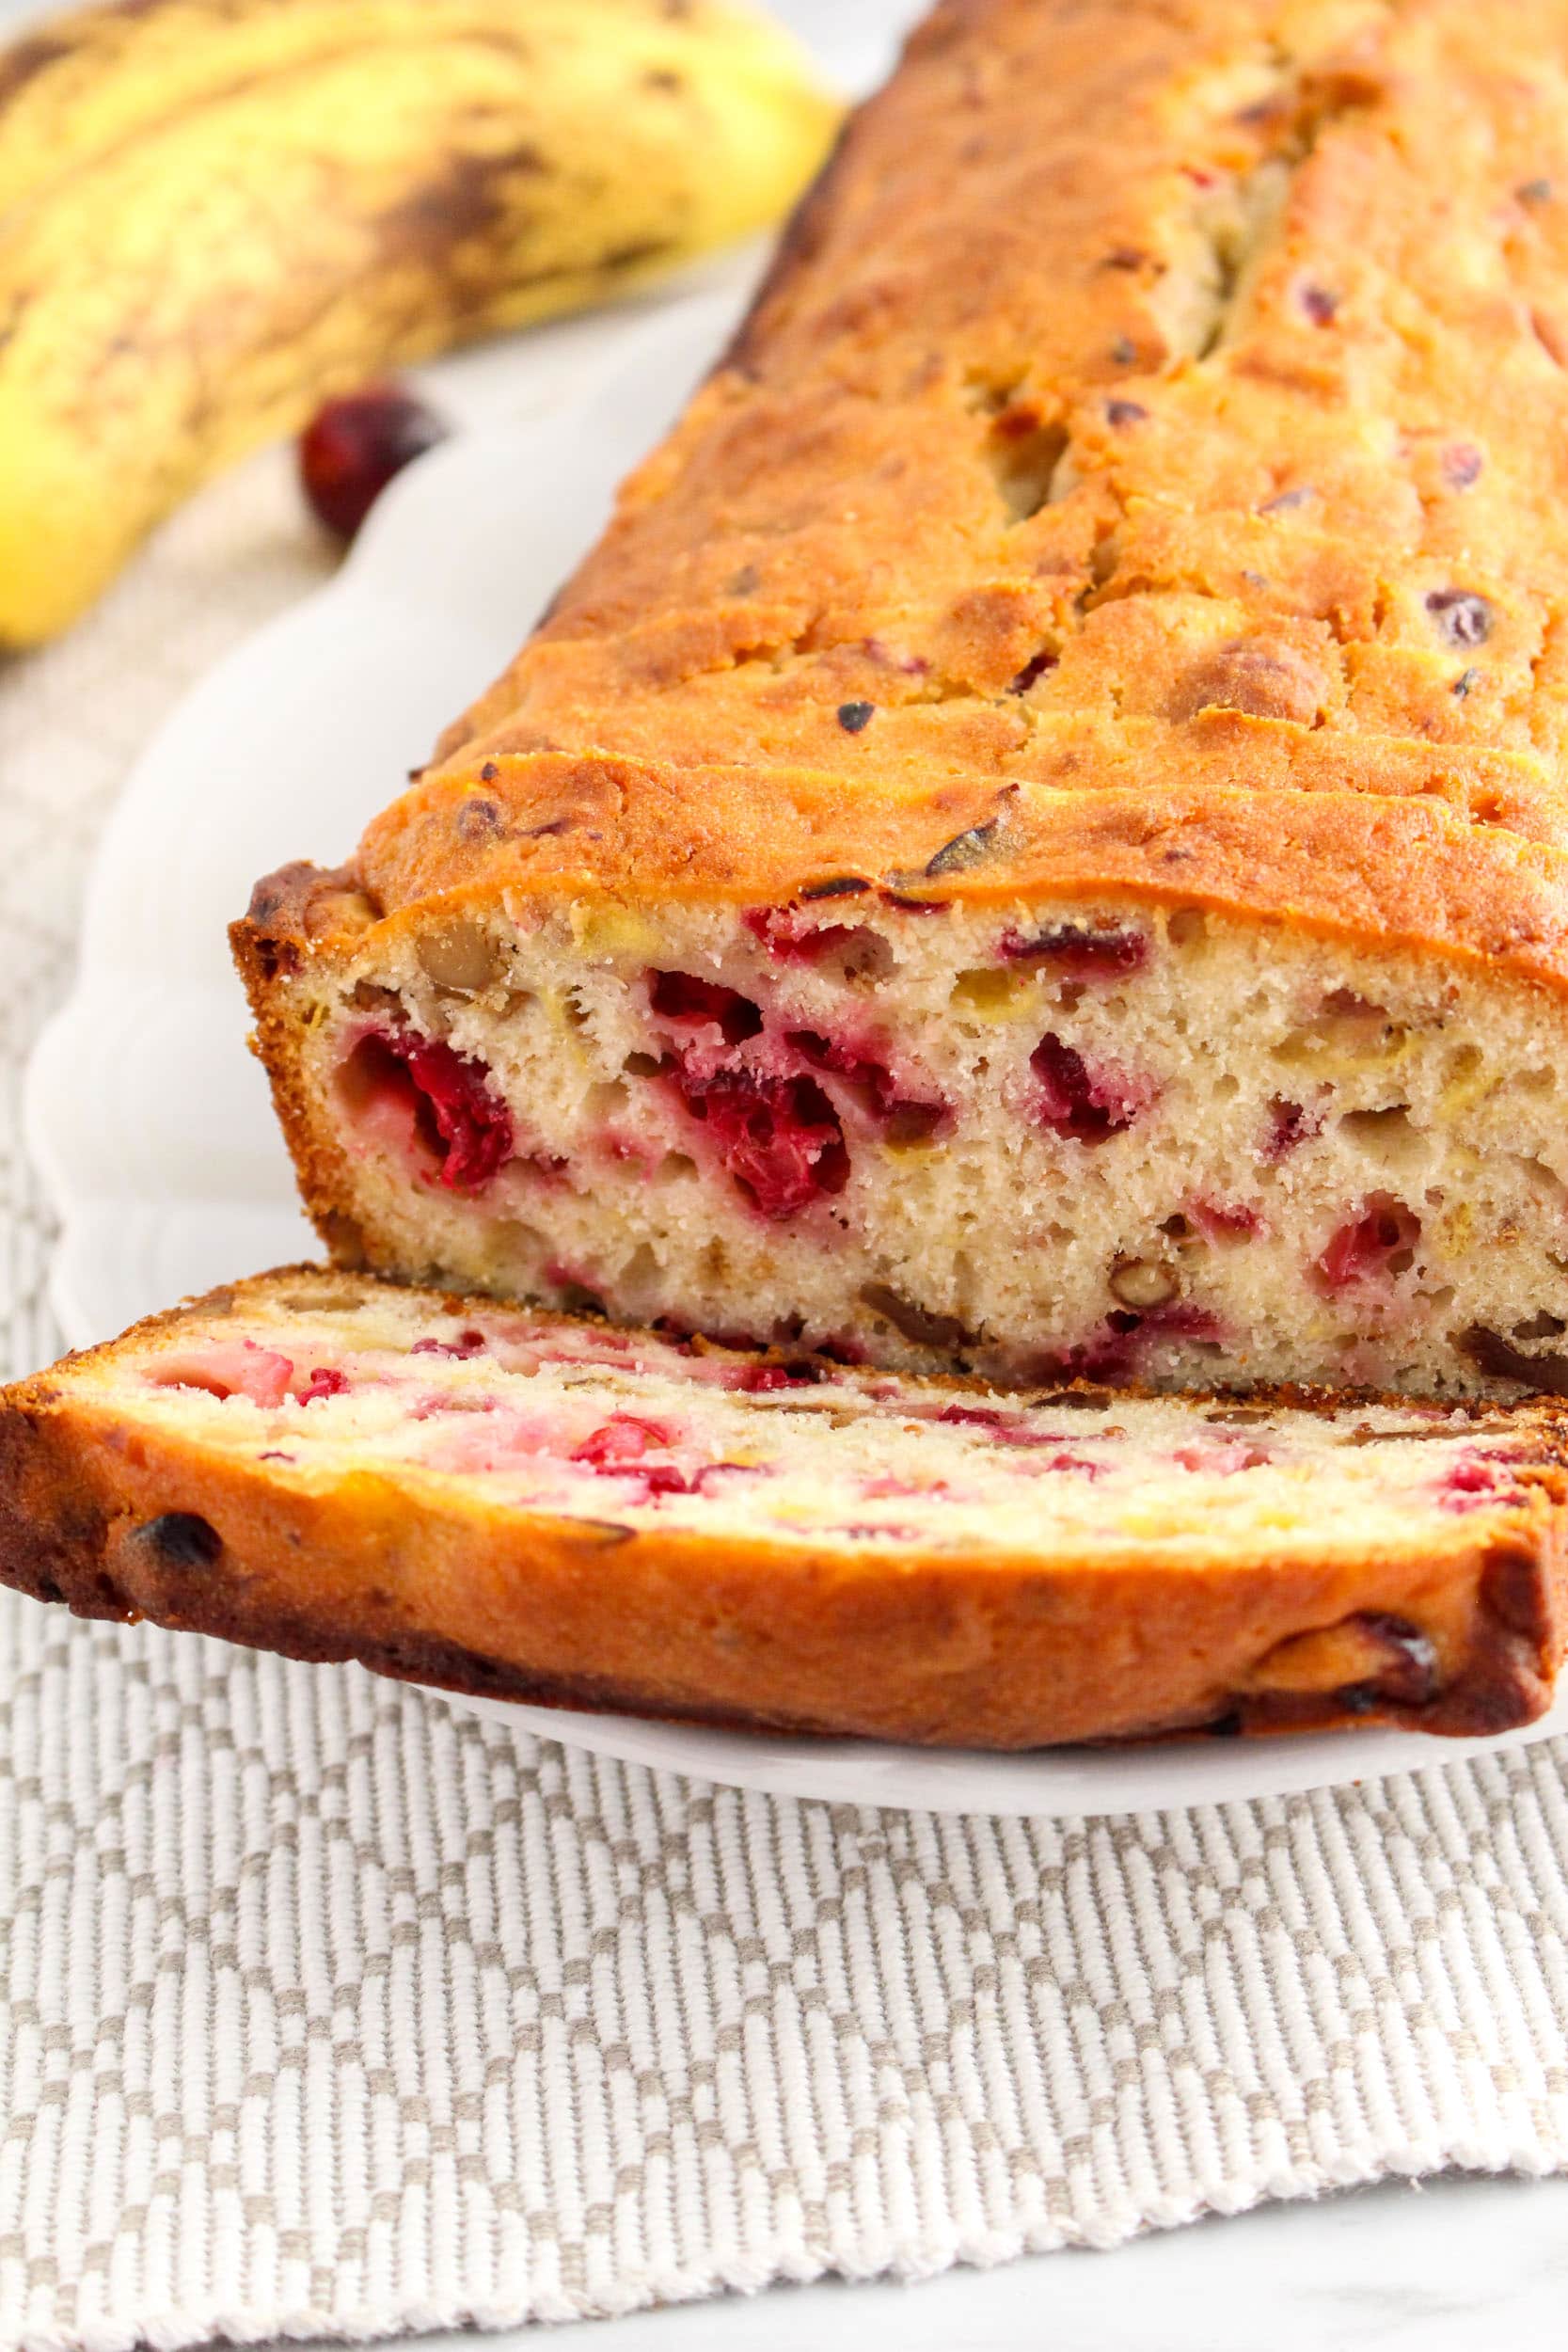 Cranberry Banana Bread on a white plate with a tan napkin